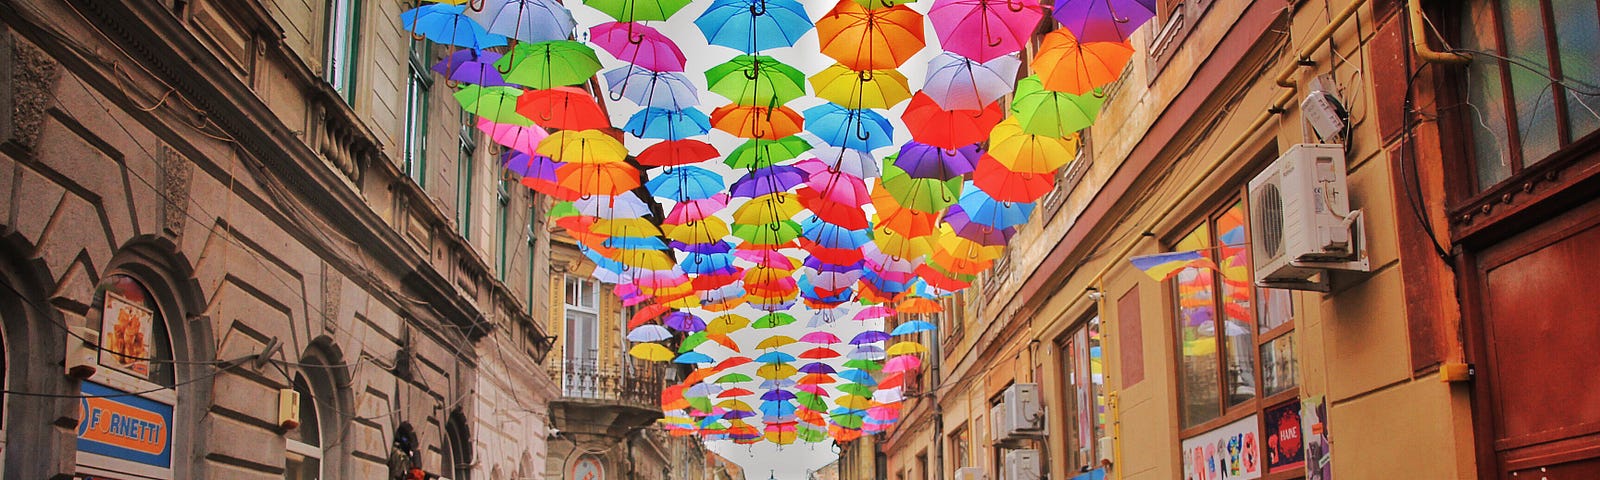 people walking down a street with colorful umbrellas above them